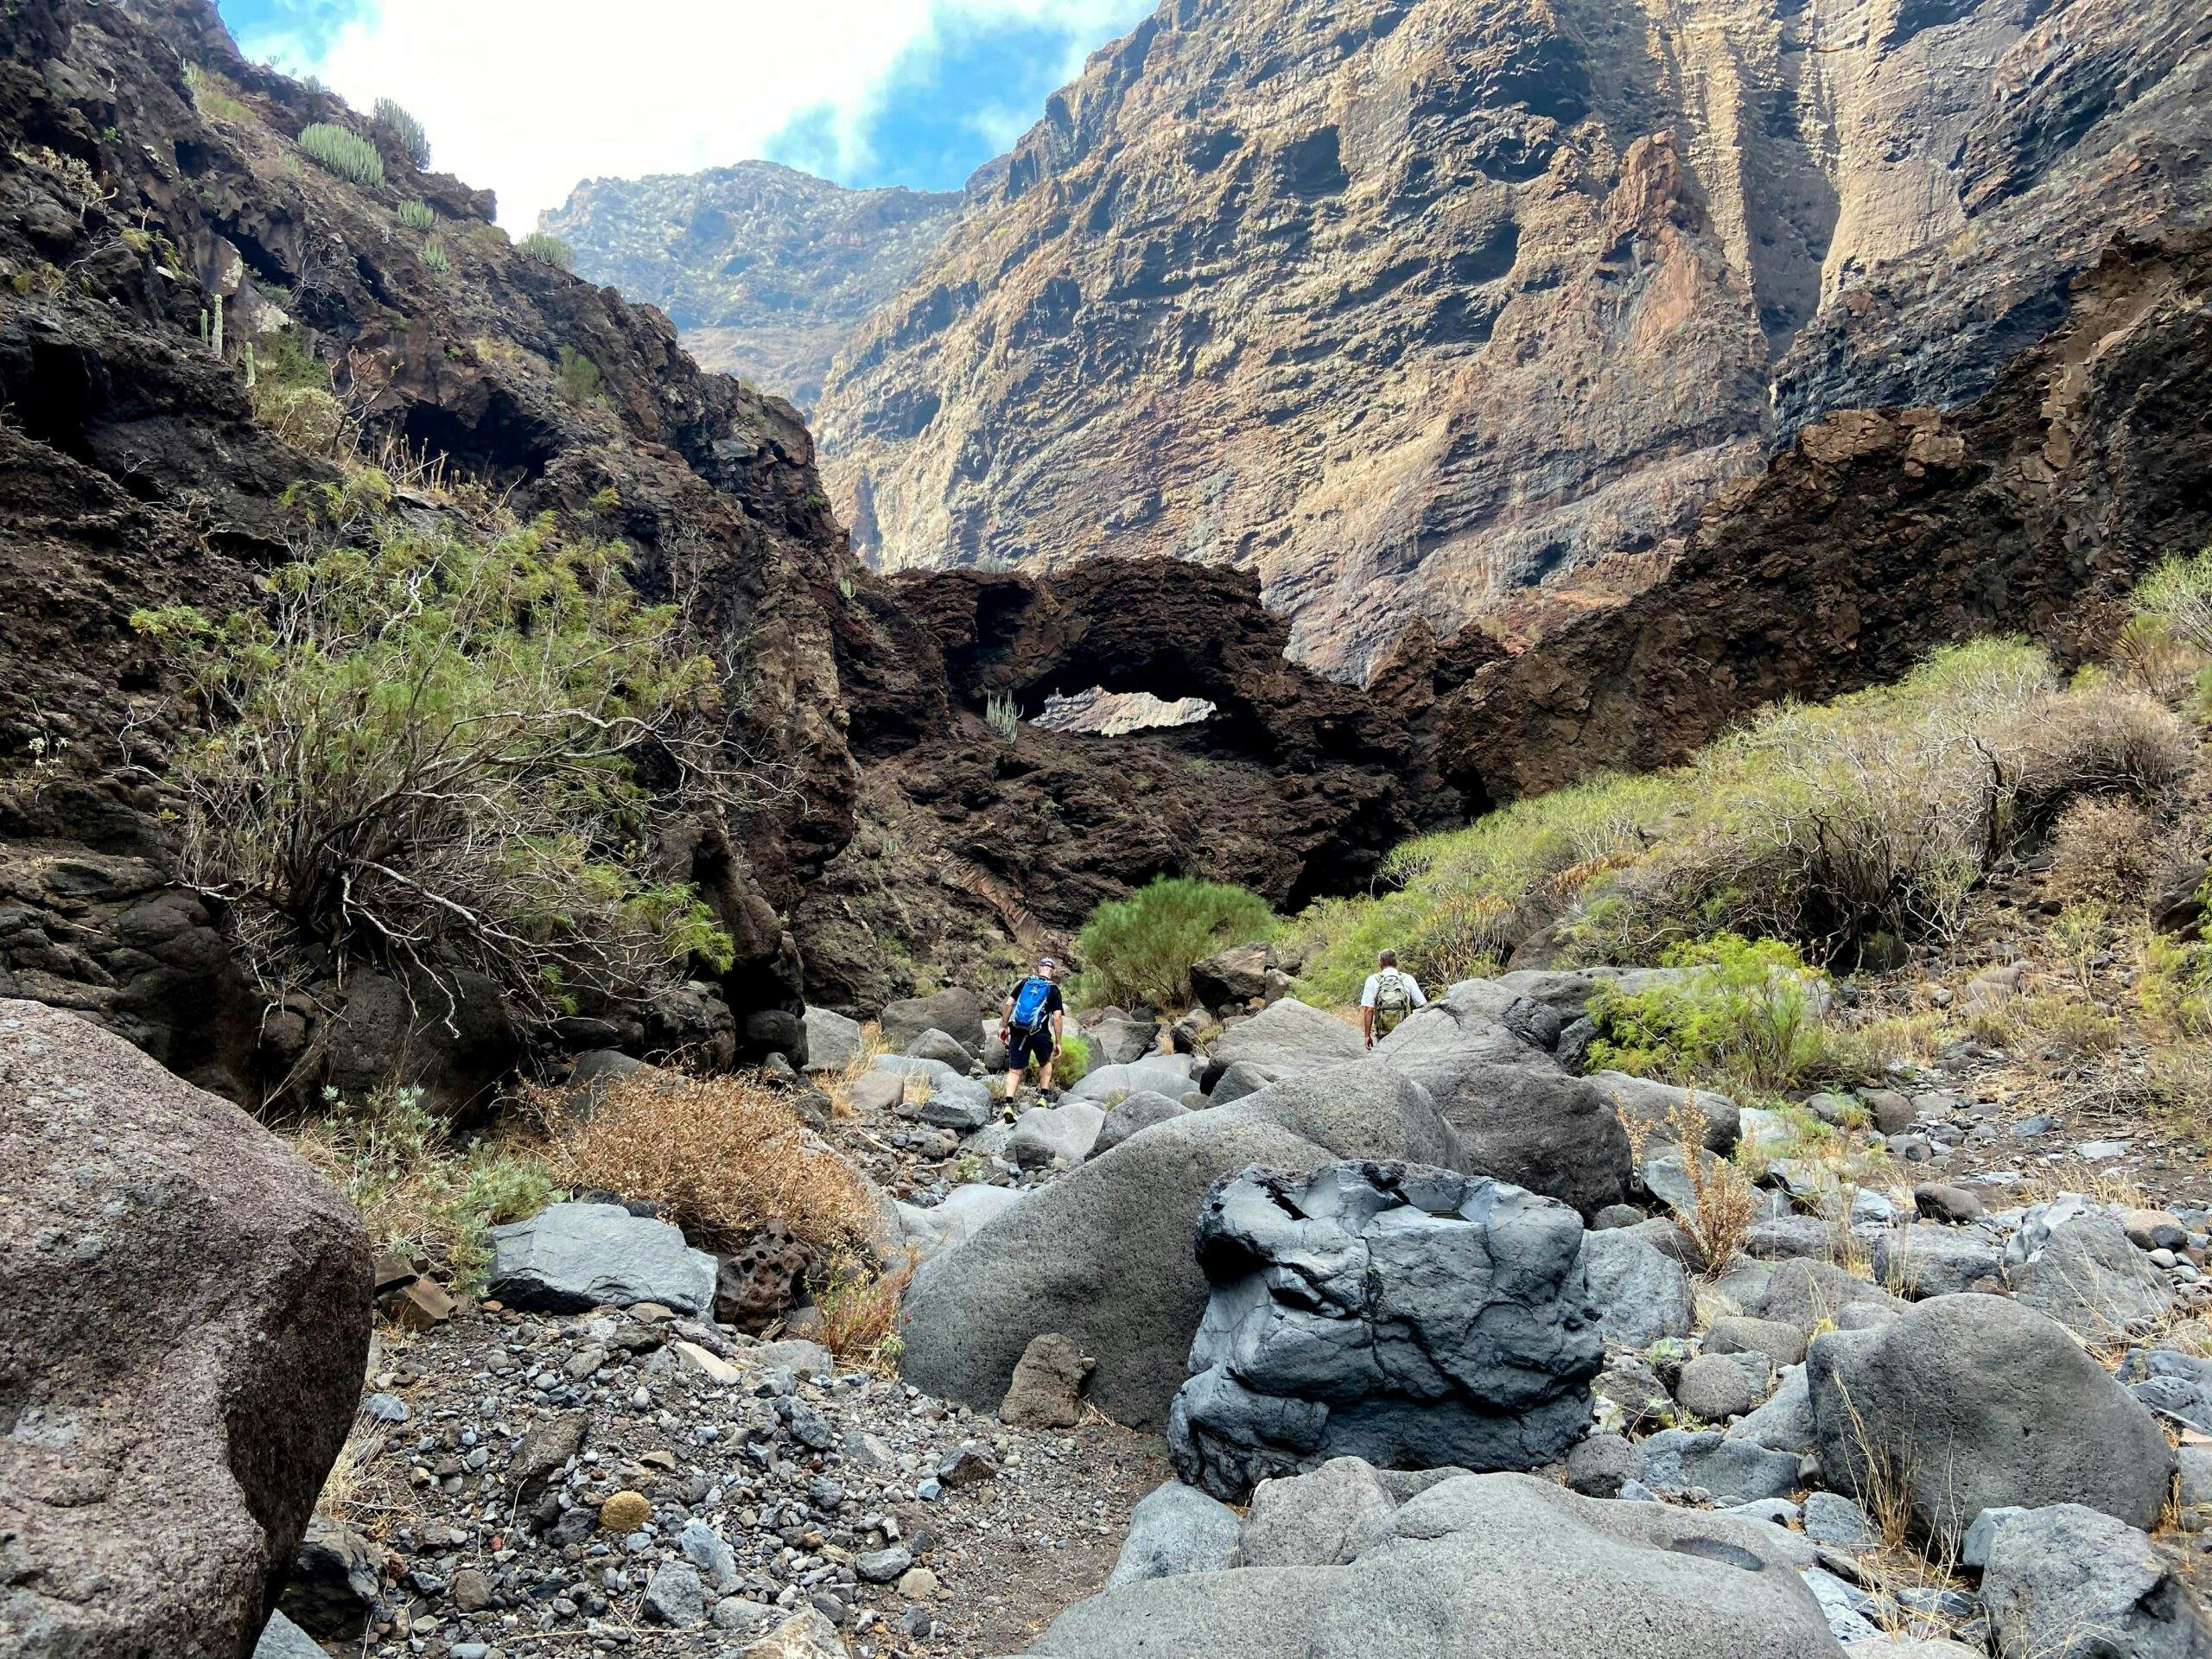 In the lower part of the Barranco Juan López, you walk over many large rocks